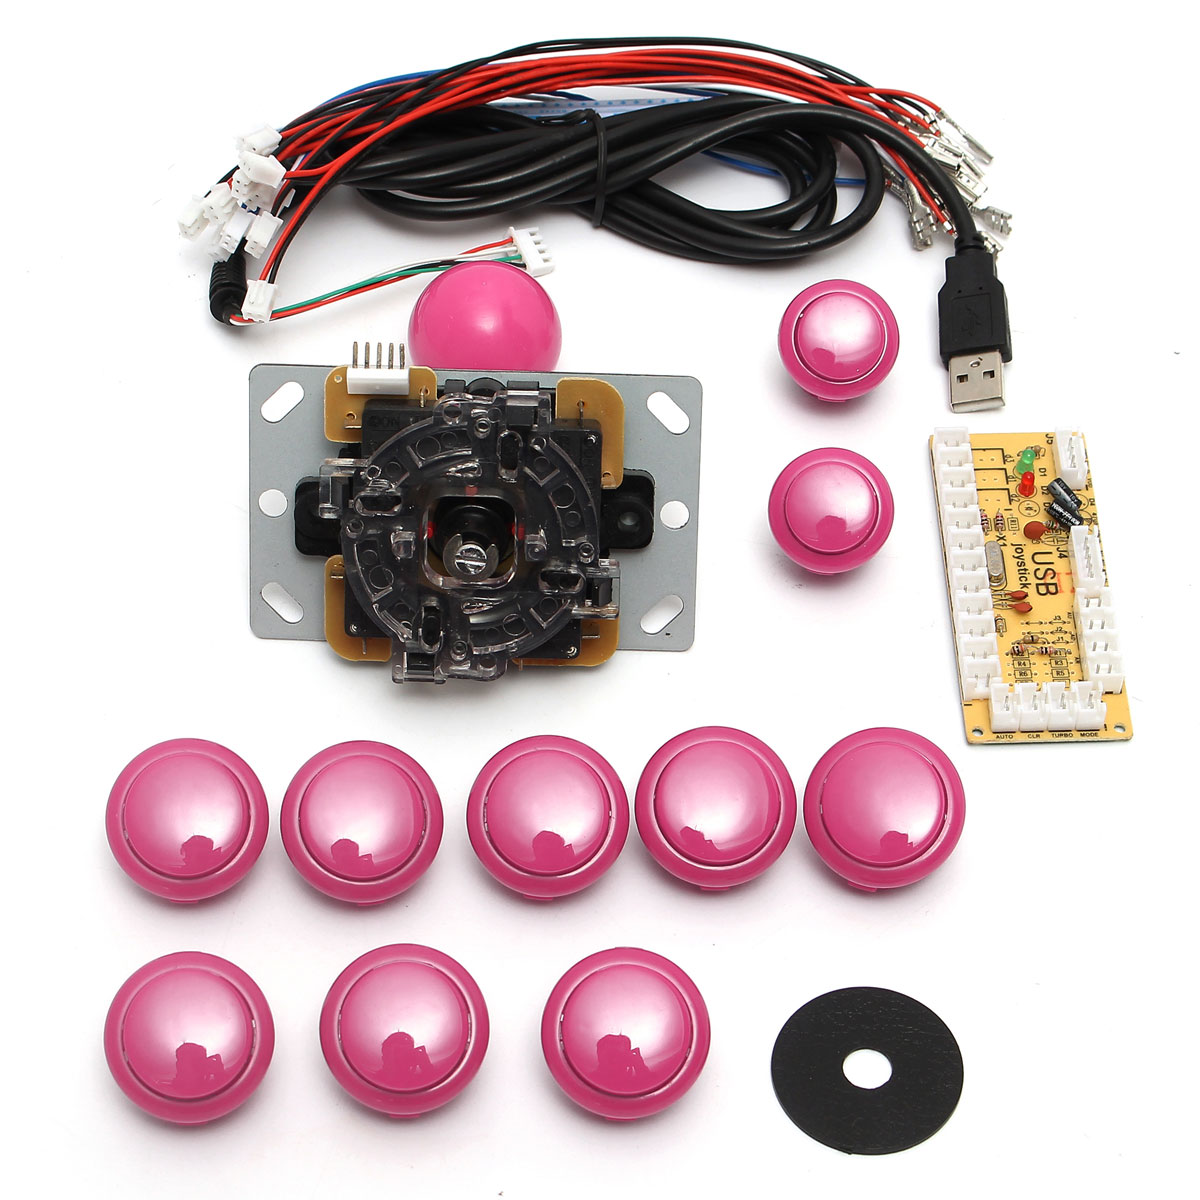 

Dual Players Pink Game DIY Arcade Game Console Set Kits Replacement Parts USB Encoders to PC Double Joysticks and Buttons